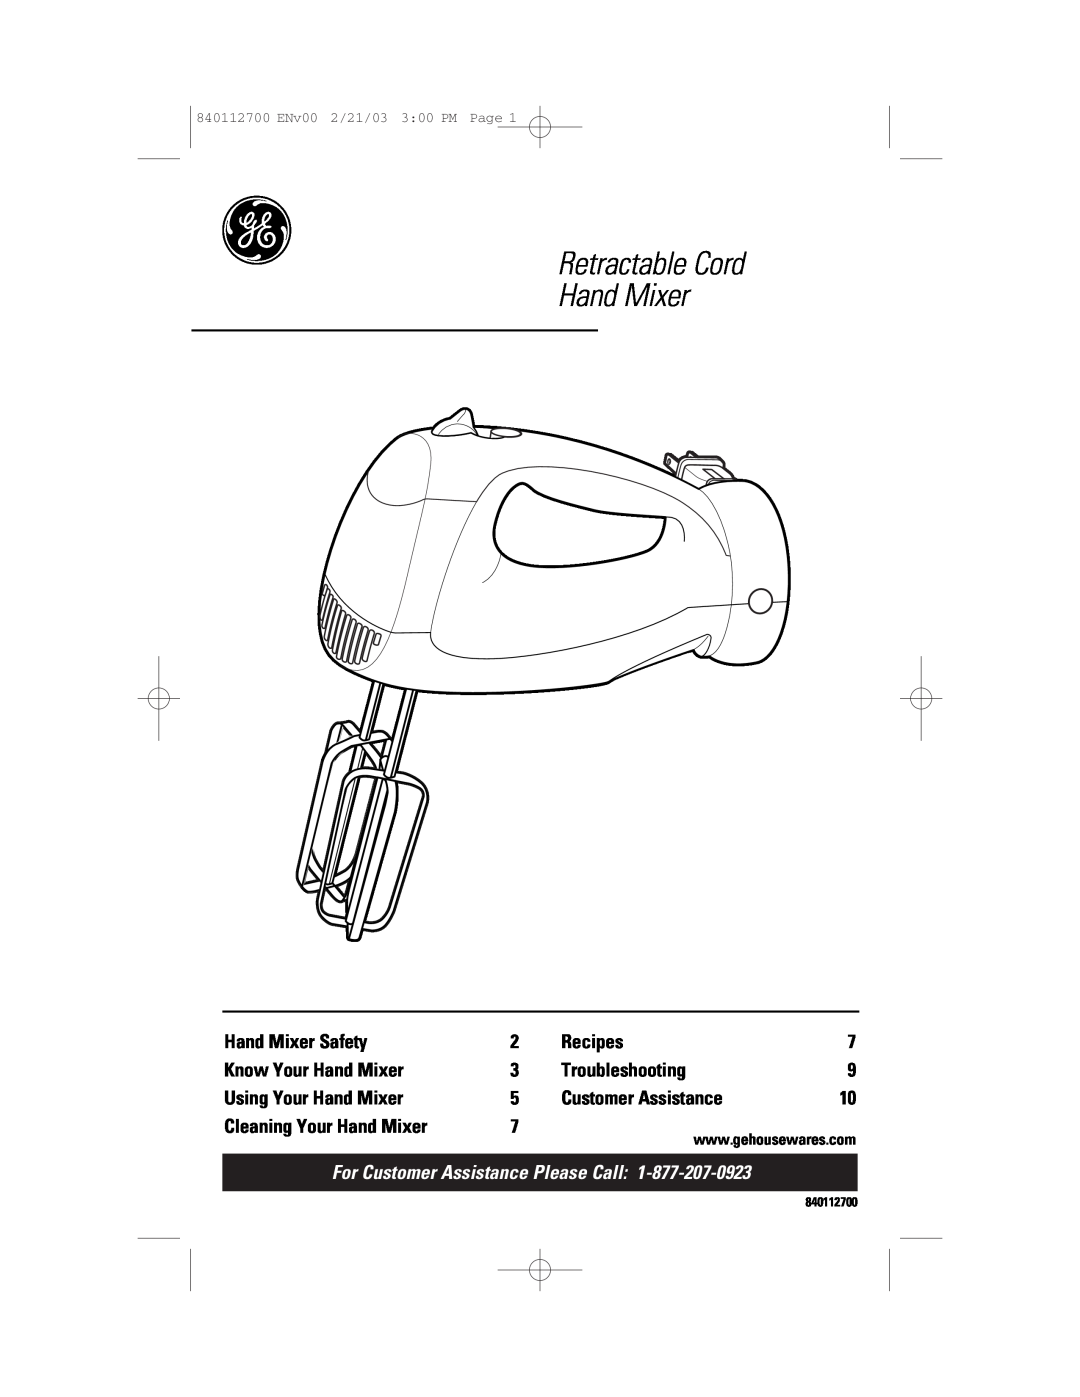 GE 168951 manual Hand Mixer Safety, Recipes, Know Your Hand Mixer, Troubleshooting, Using Your Hand Mixer, 840112700 